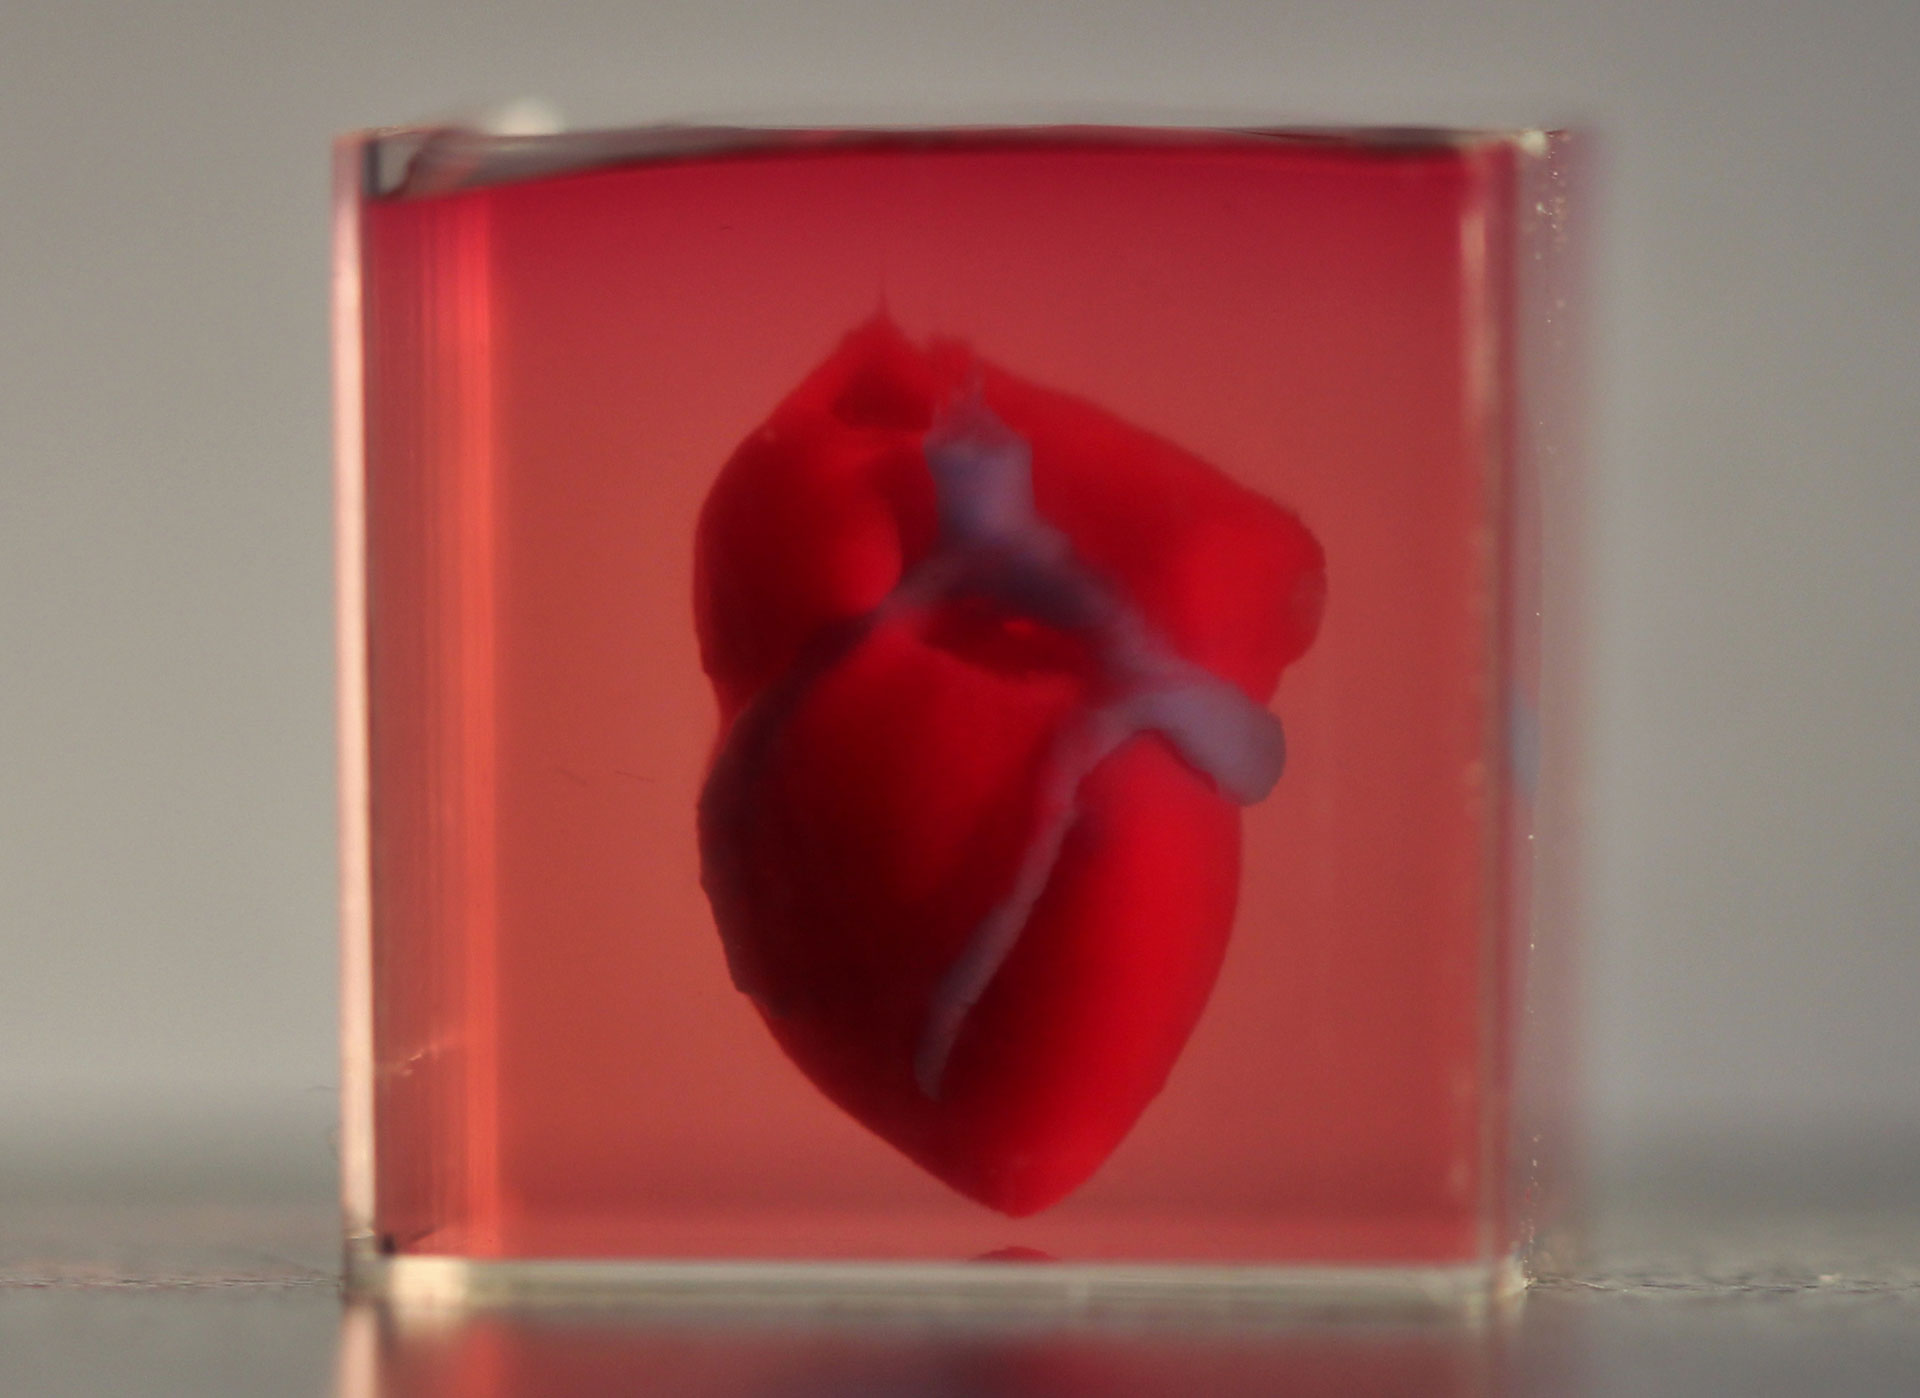 3D printed heart (Photo: file)